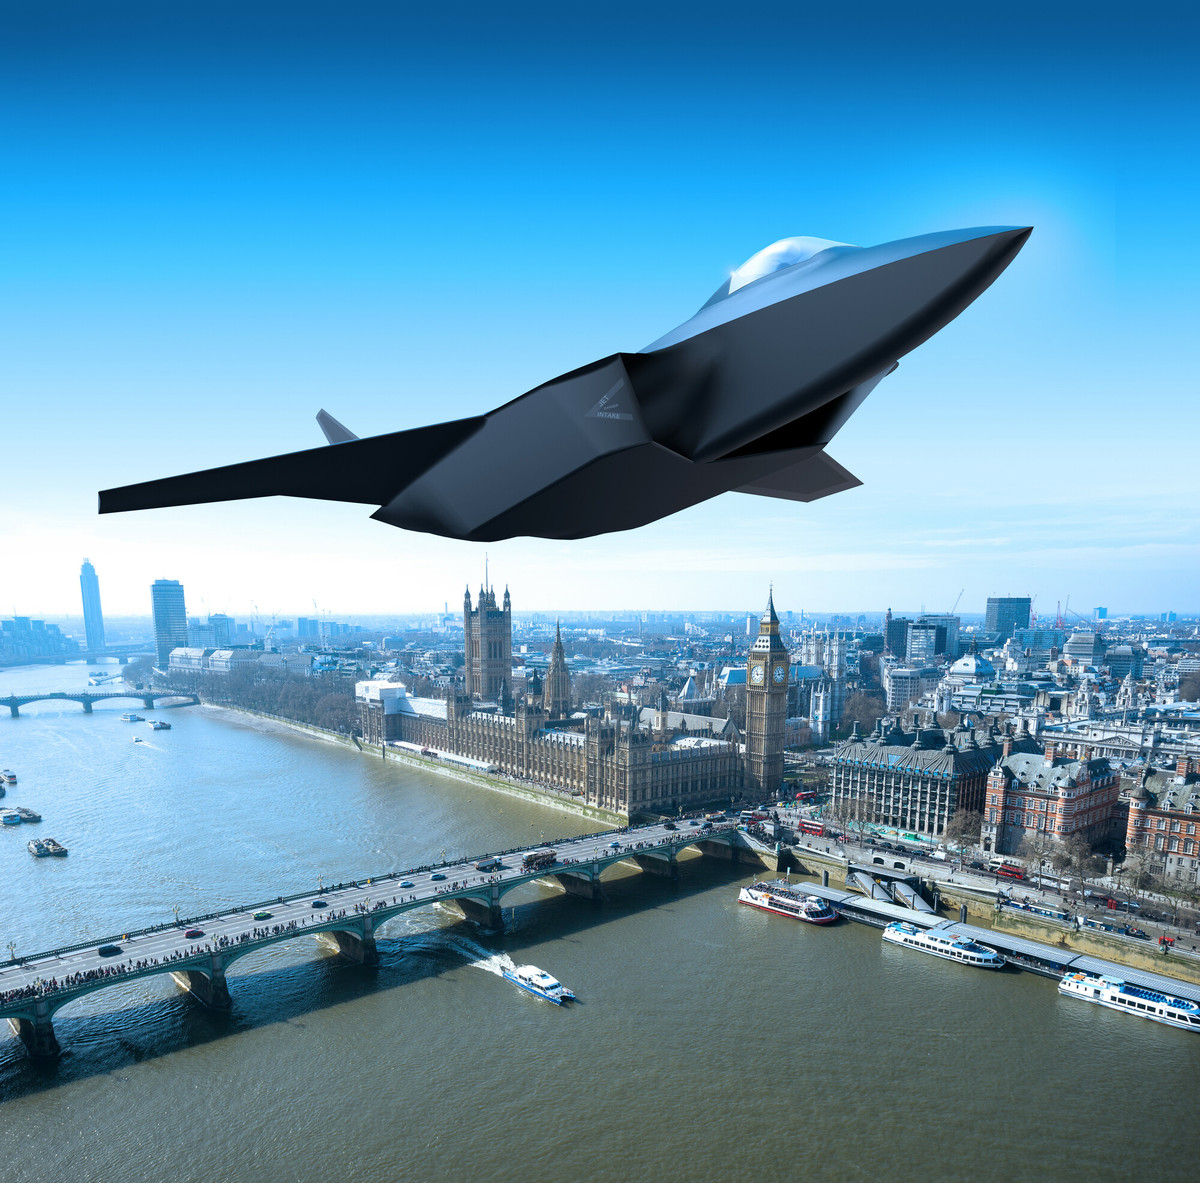 Tempest flying over the Thames and London